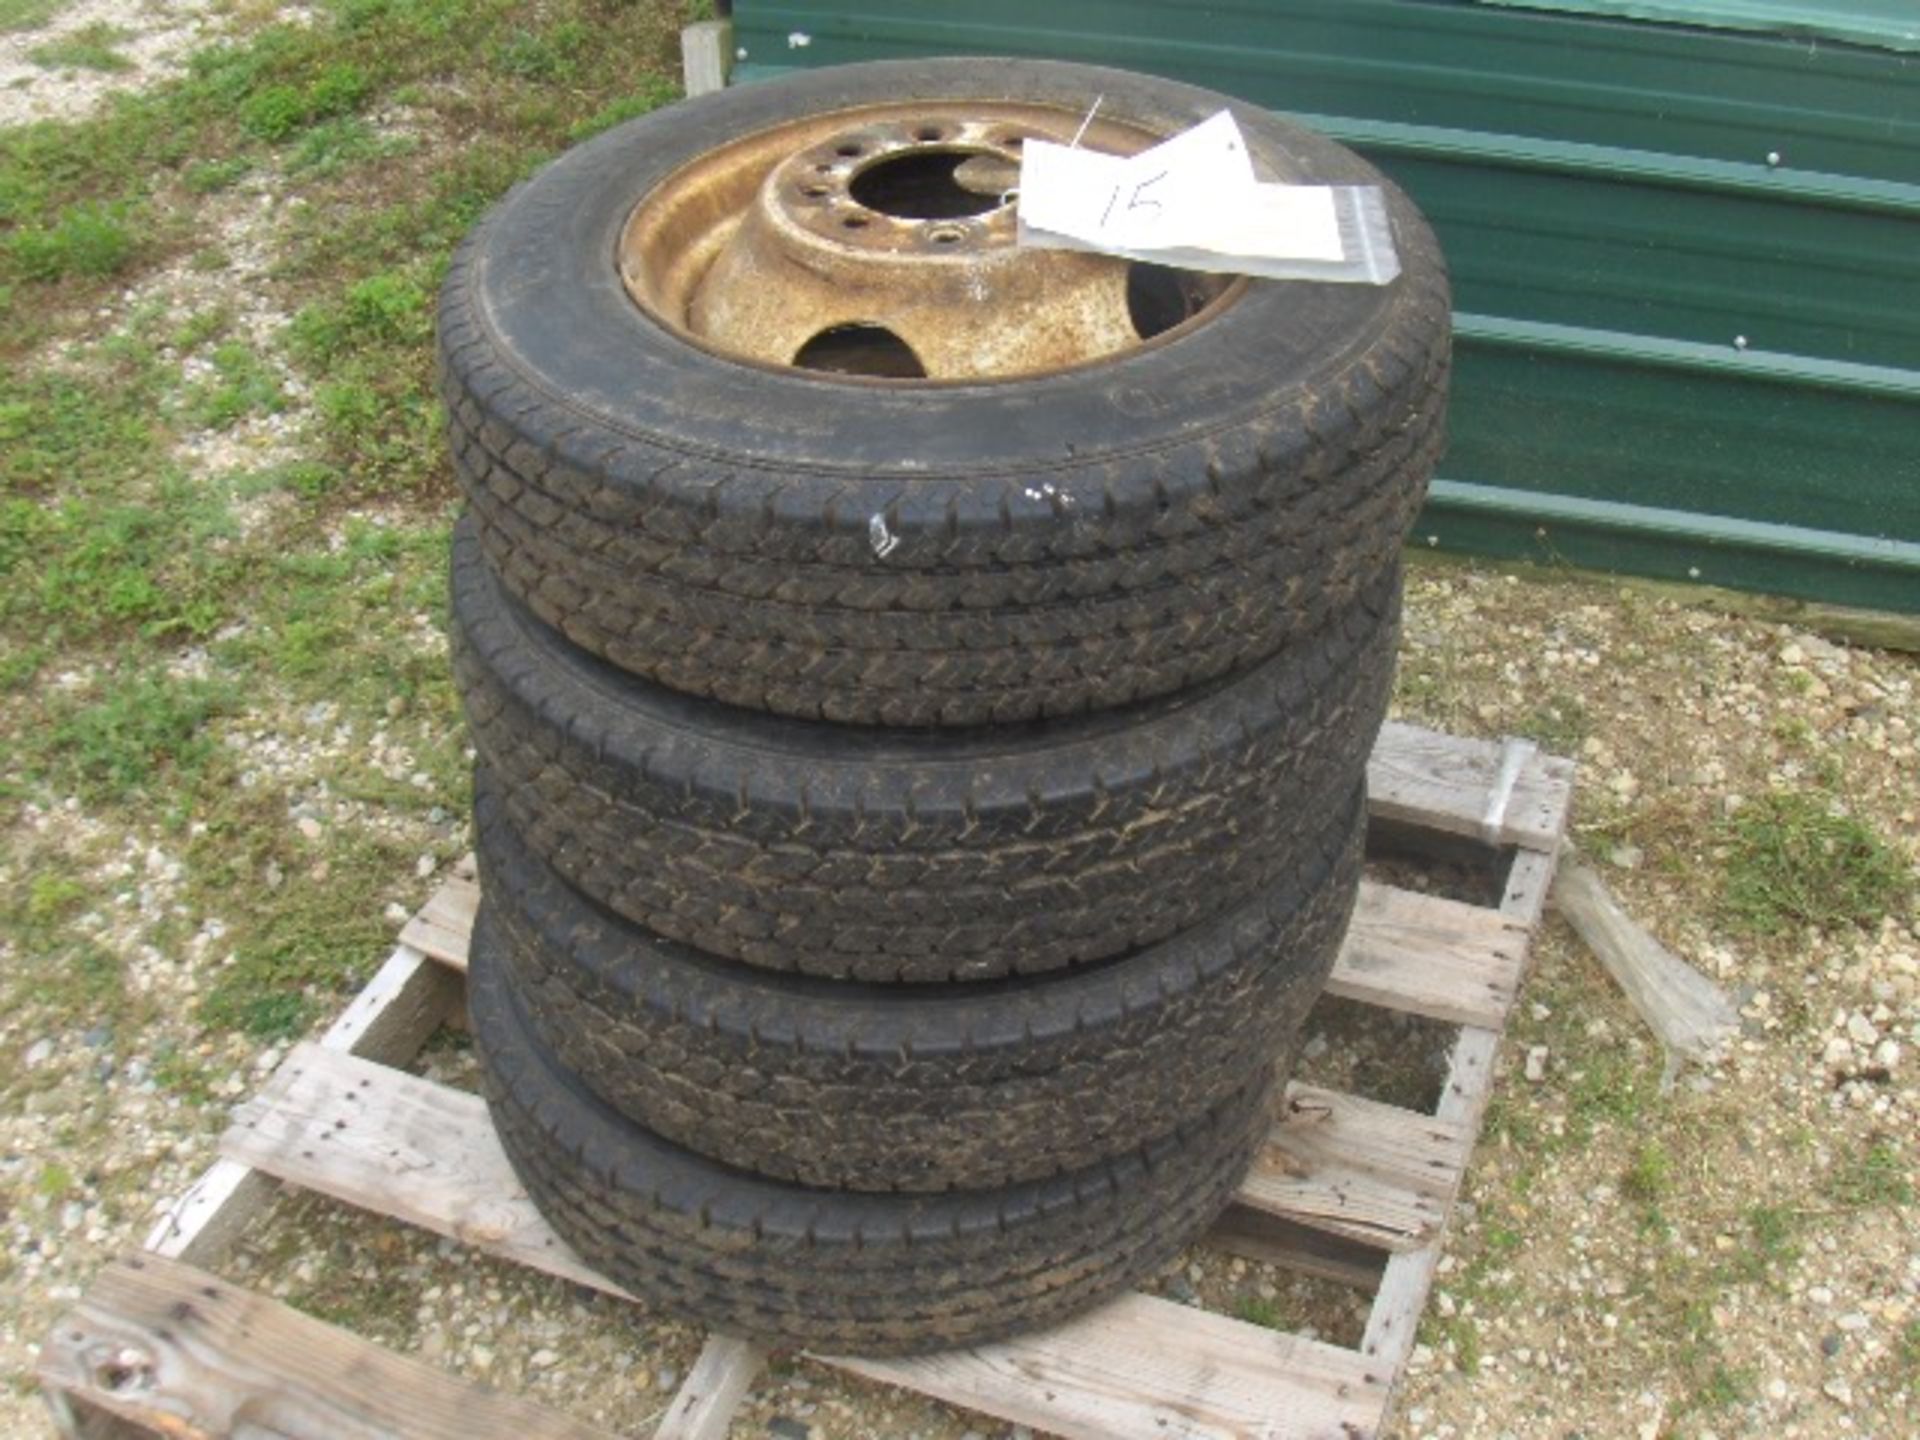 4-Wheels & Tires, 8.00R16.5LT, sold with a bill of sale only